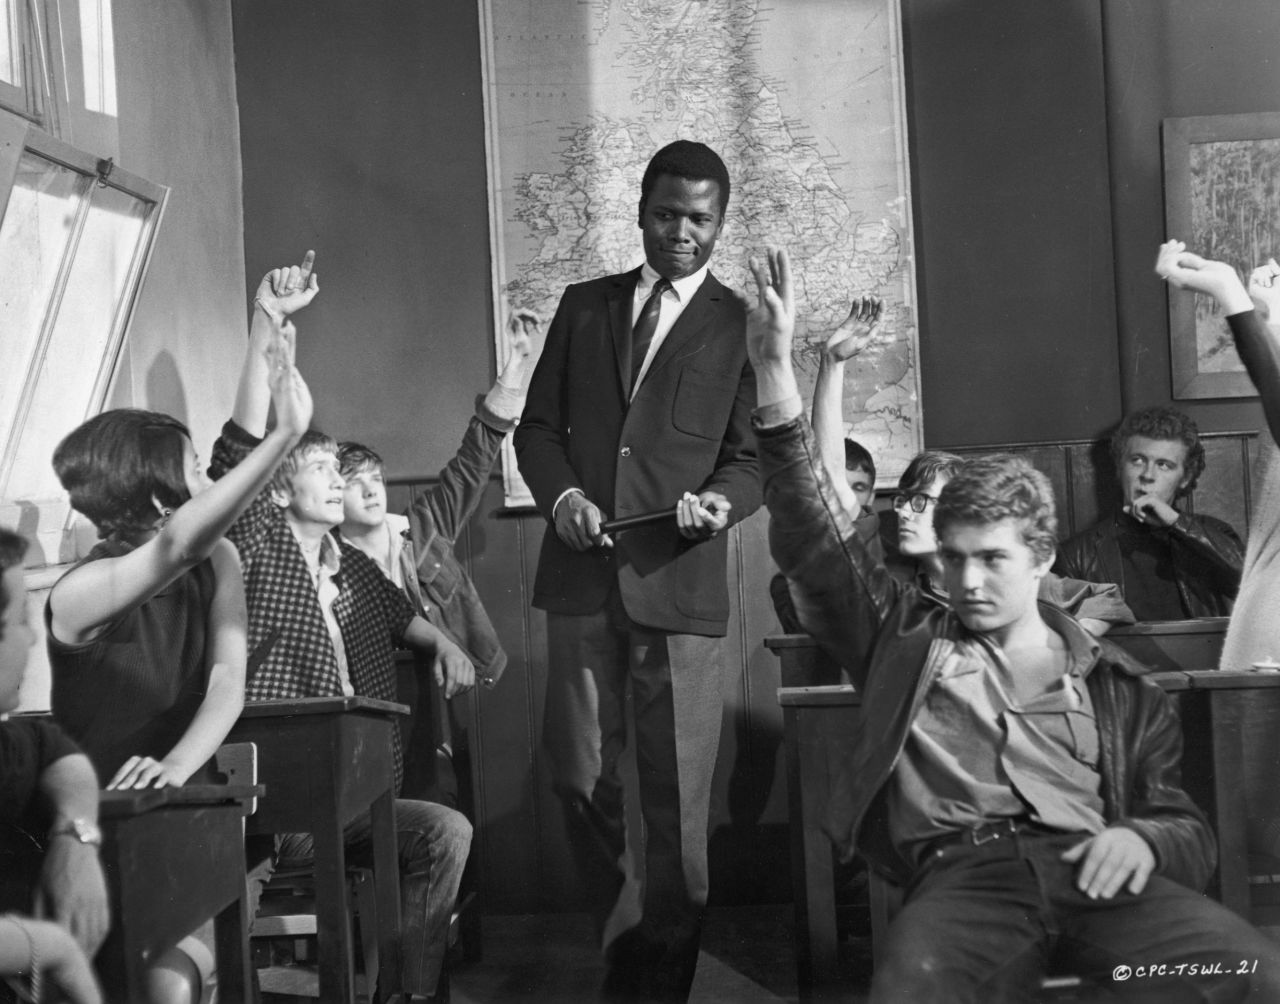 Poitier's 1967 was one of the most dominant years ever enjoyed by an actor, with three successful and notable films. One of them, "To Sir, with Love," turned "Blackboard Jungle" on its head, this time with Poitier as a teacher of misfits in working-class England. The movie's theme, sung by Lulu, was the No. 1 song of 1967.